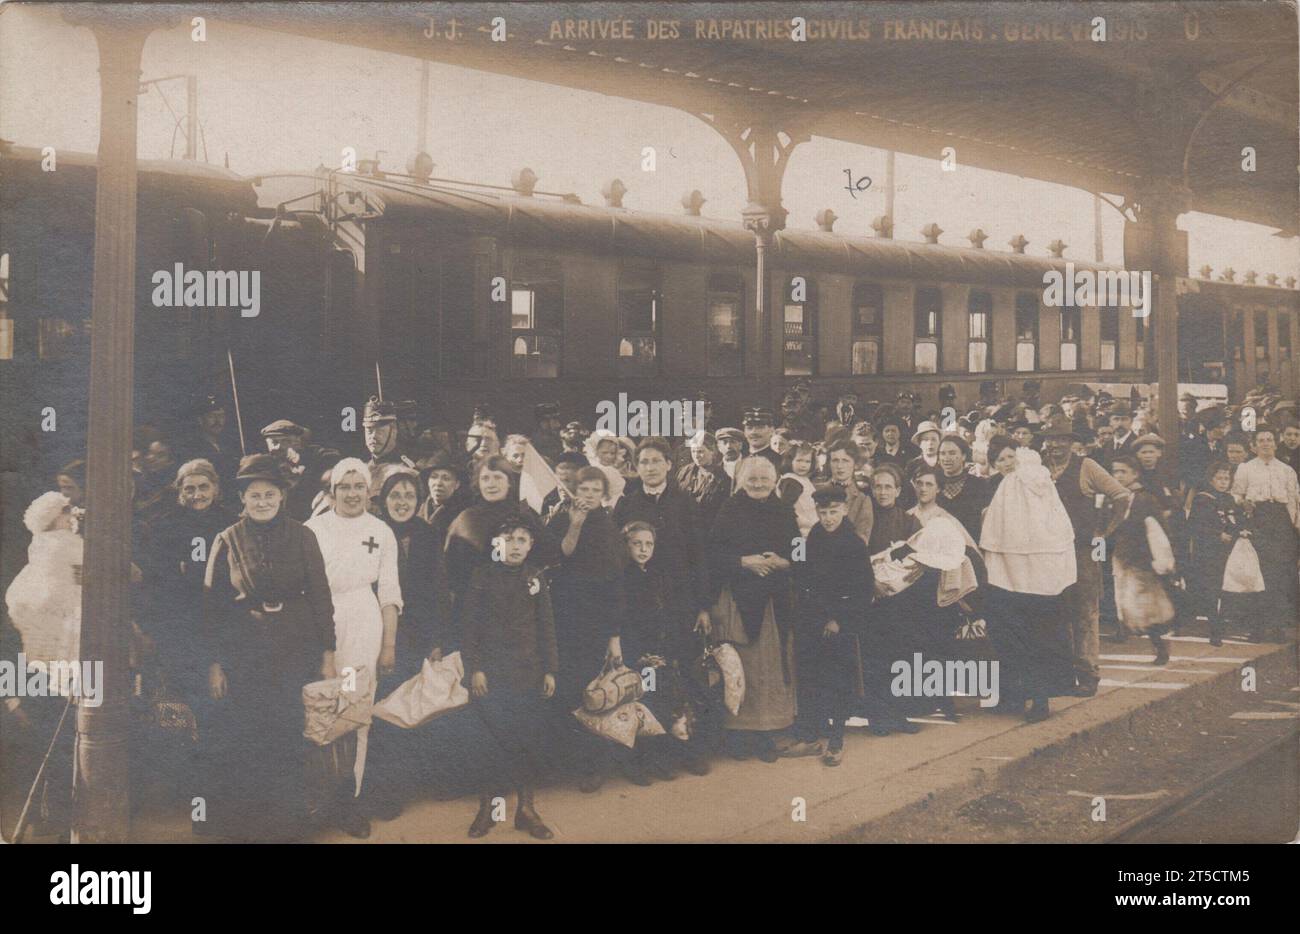 'Arrival of French civilian refugees, Geneva 1915' / 'Arrivée des rapatriés civils Français, Genève 1915': large group of people on a railway station platform, next to a train. Most of the passengers are women and children. A nurse, dressed in white with a red cross on her uniform, is standing towards the front. Some of the people are carrying bundles of belongings. One person is holding a French tricolour flag. Stock Photo